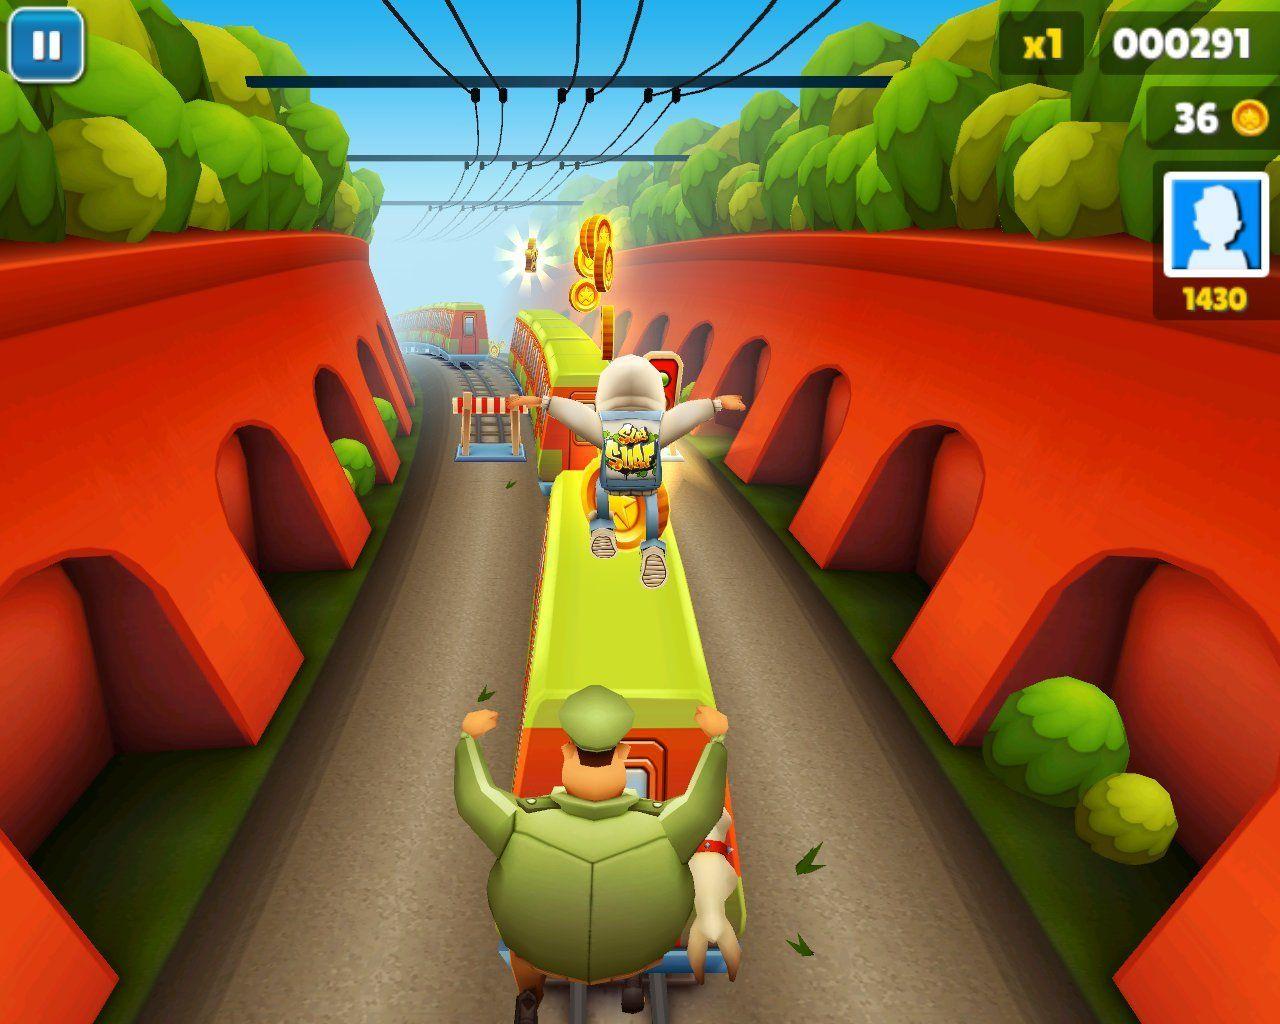 subway surfers on X: #subway #surfers #wallpapers #great #game #android   / X